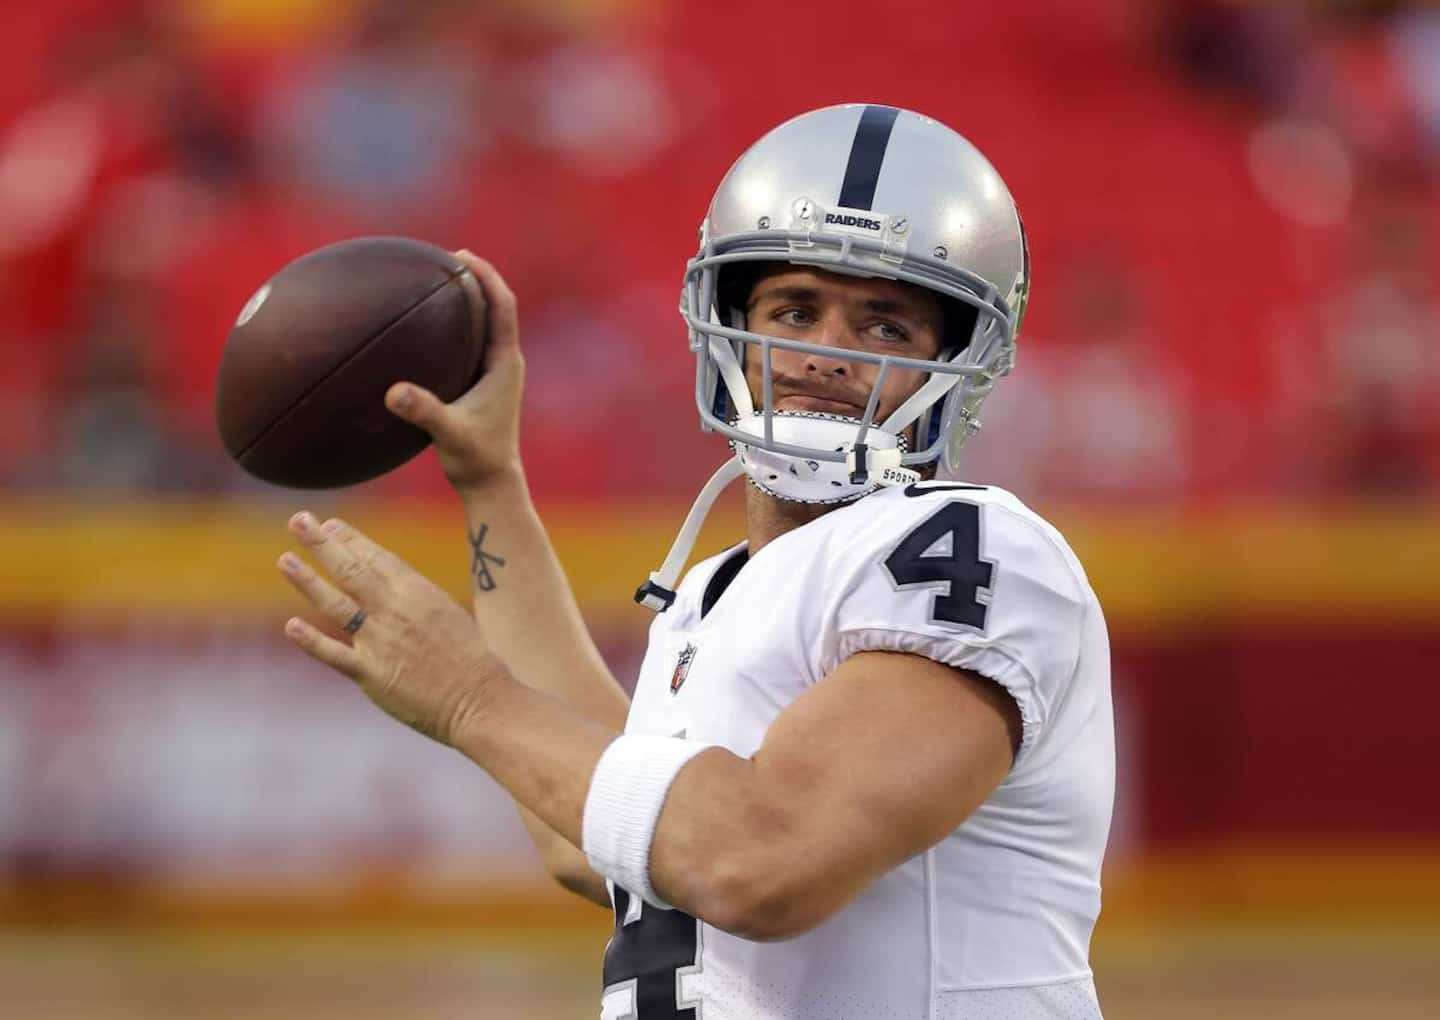 The Raiders are fed up with Derek Carr